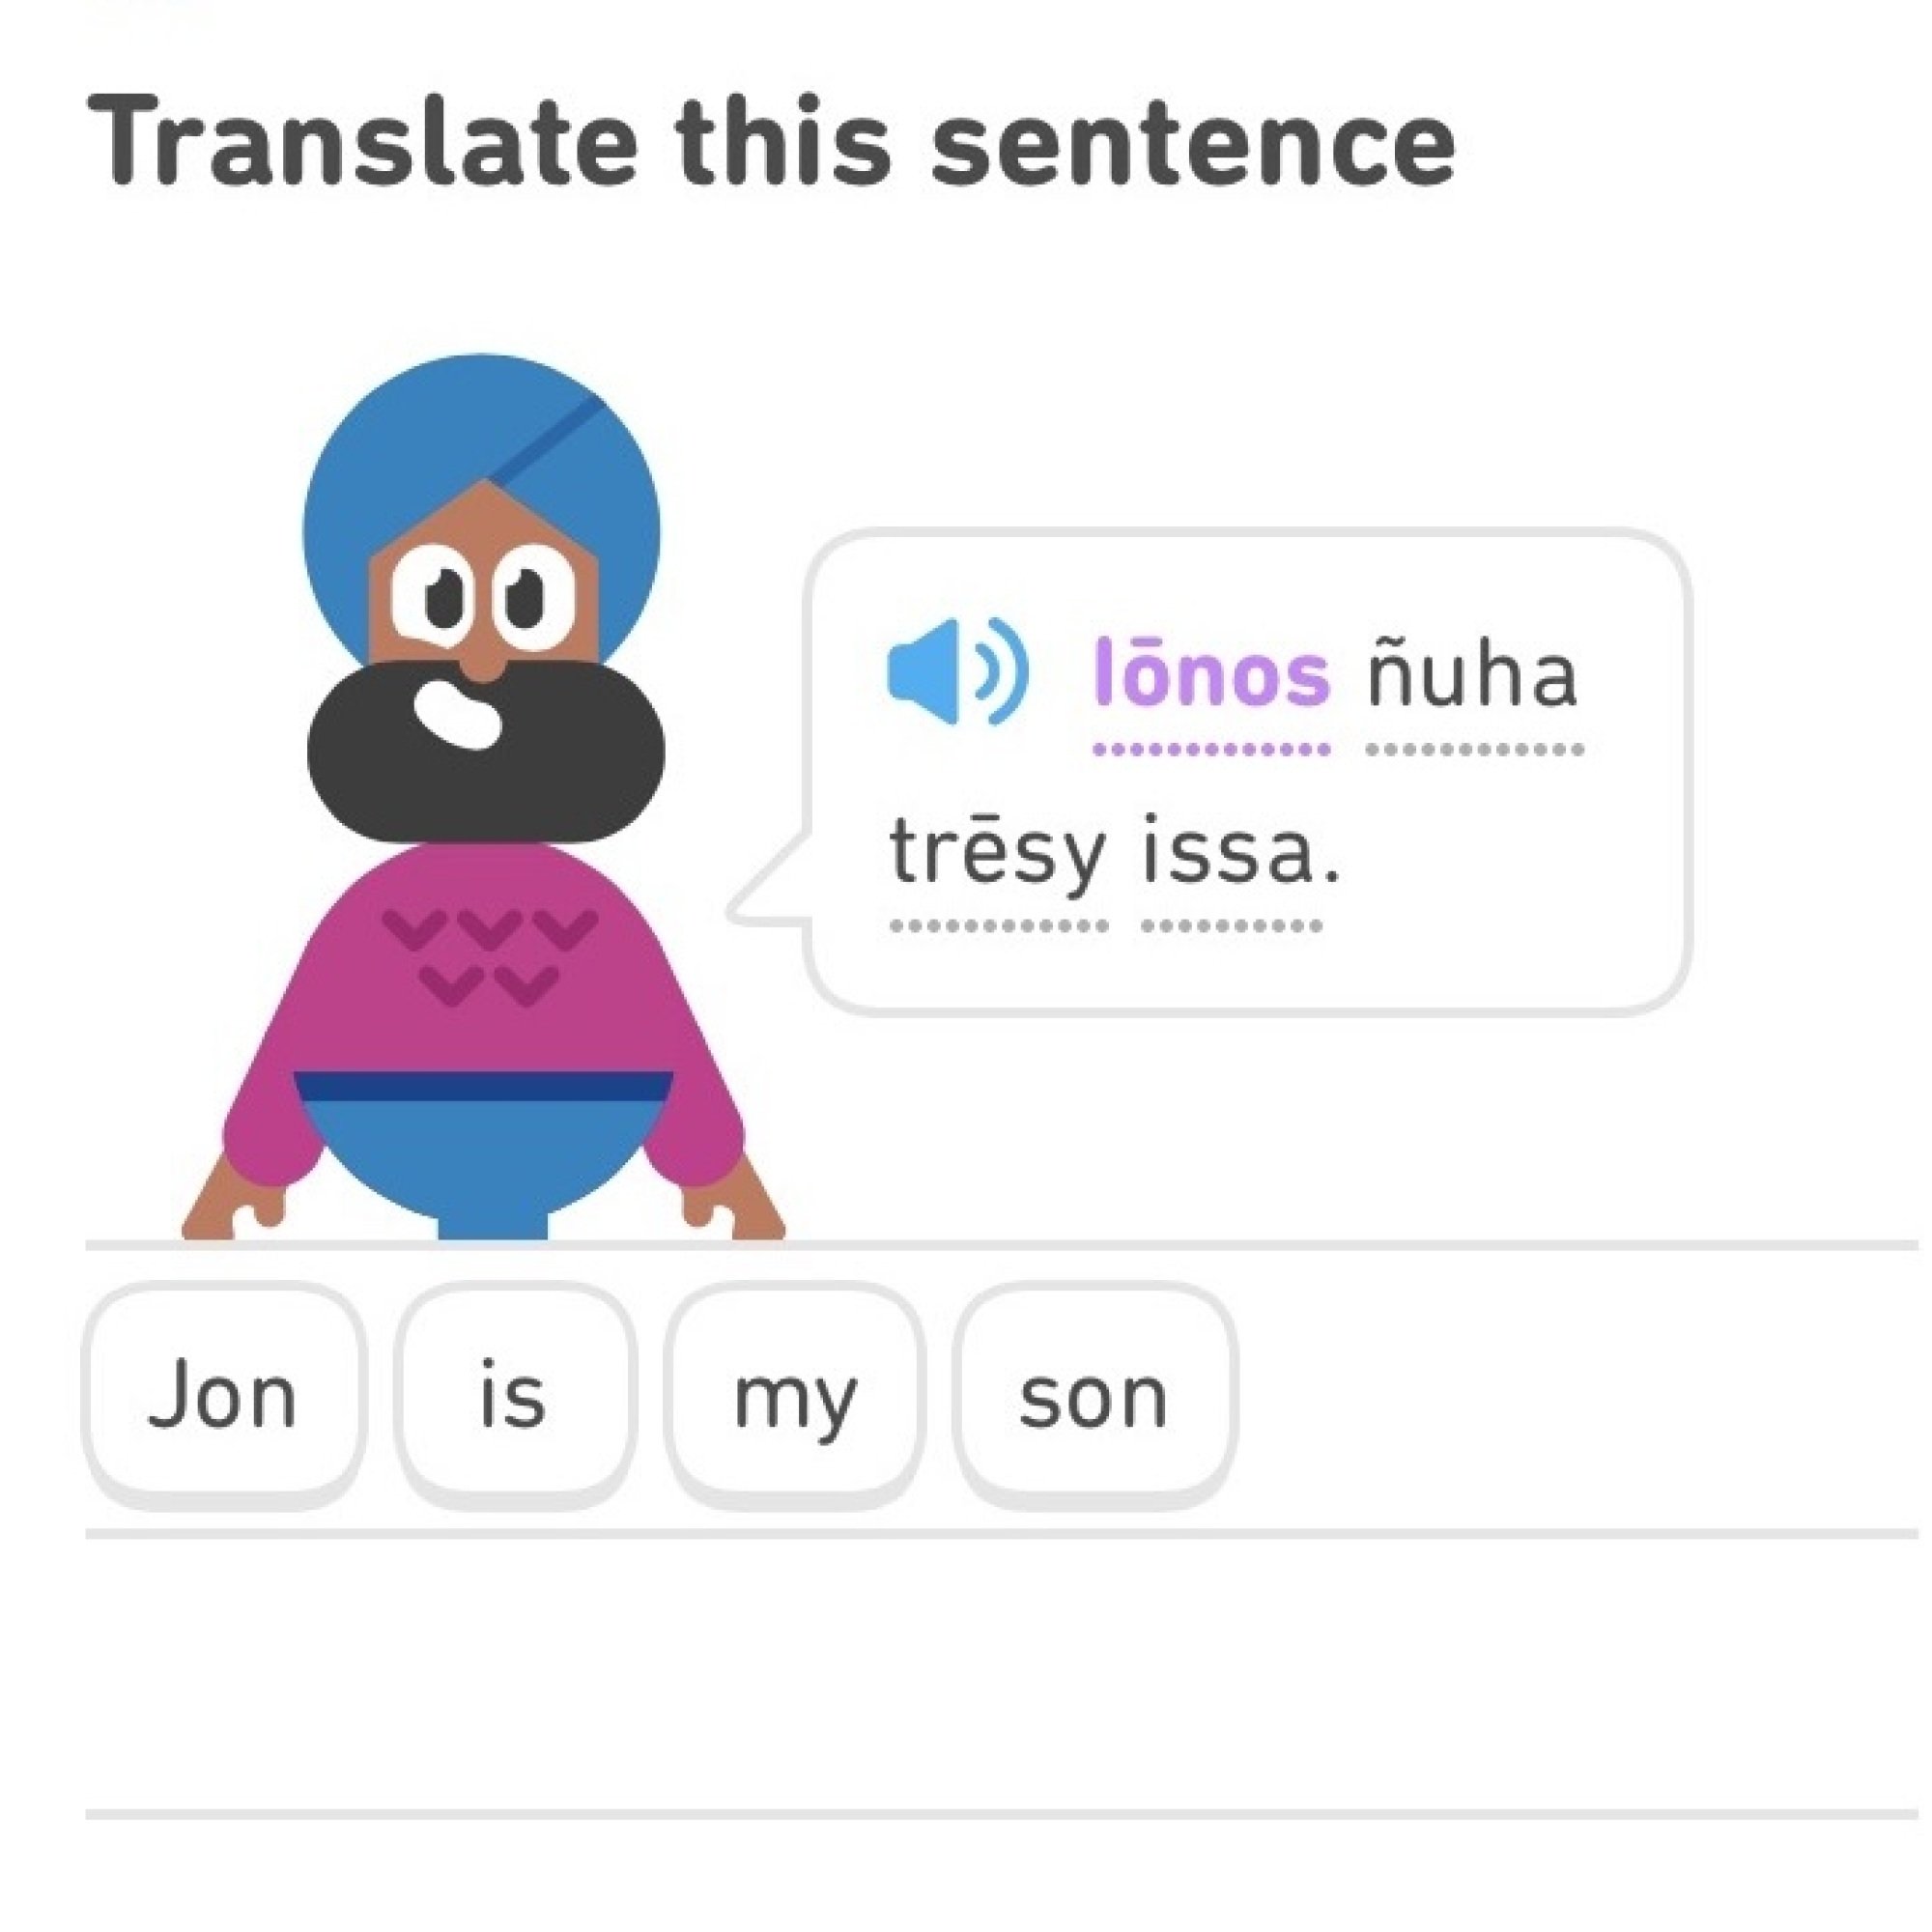 A Duolingo exercise translating the phrase "Jon is my son" from High Valyrian.